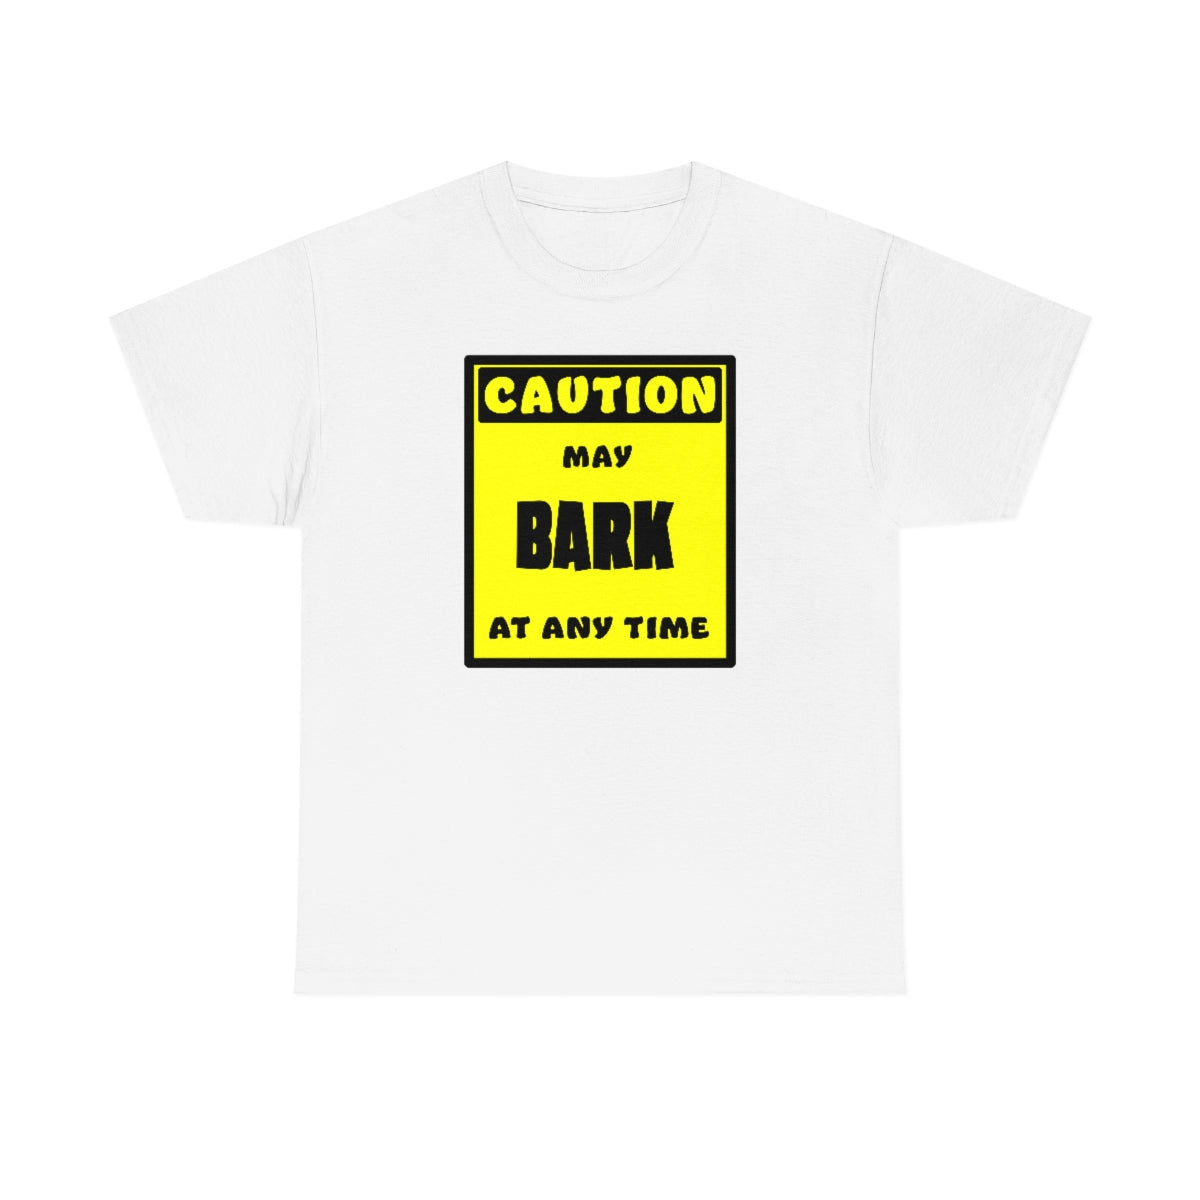 CAUTION! May BARK at any time! - T-Shirt T-Shirt AFLT-Whootorca White S 